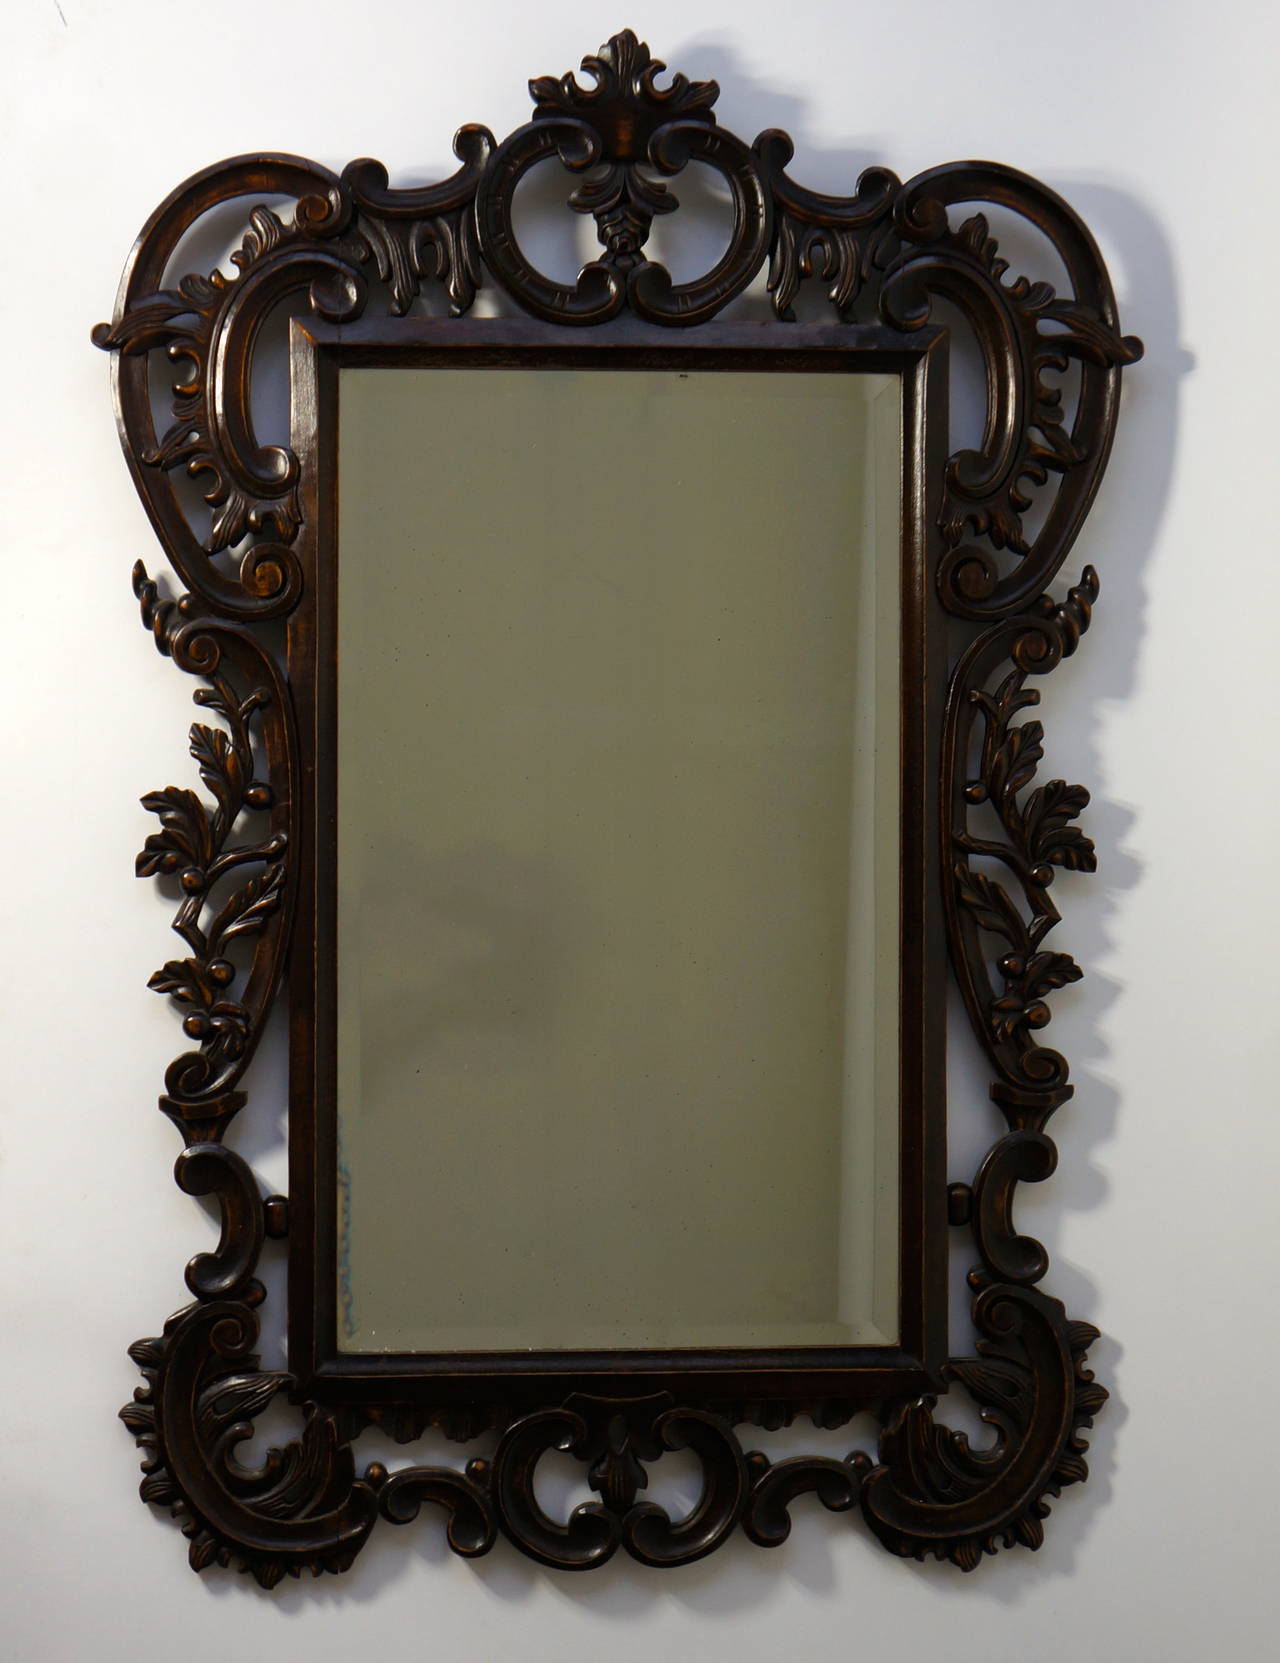 A large, highly carved vintage mirror in the Baroque style with beautiful patine. This item is great for formal and informal setting.
Beach house or city loft, this mirror covers it all.
Measures: Height 103 cm.
Width 72 cm.